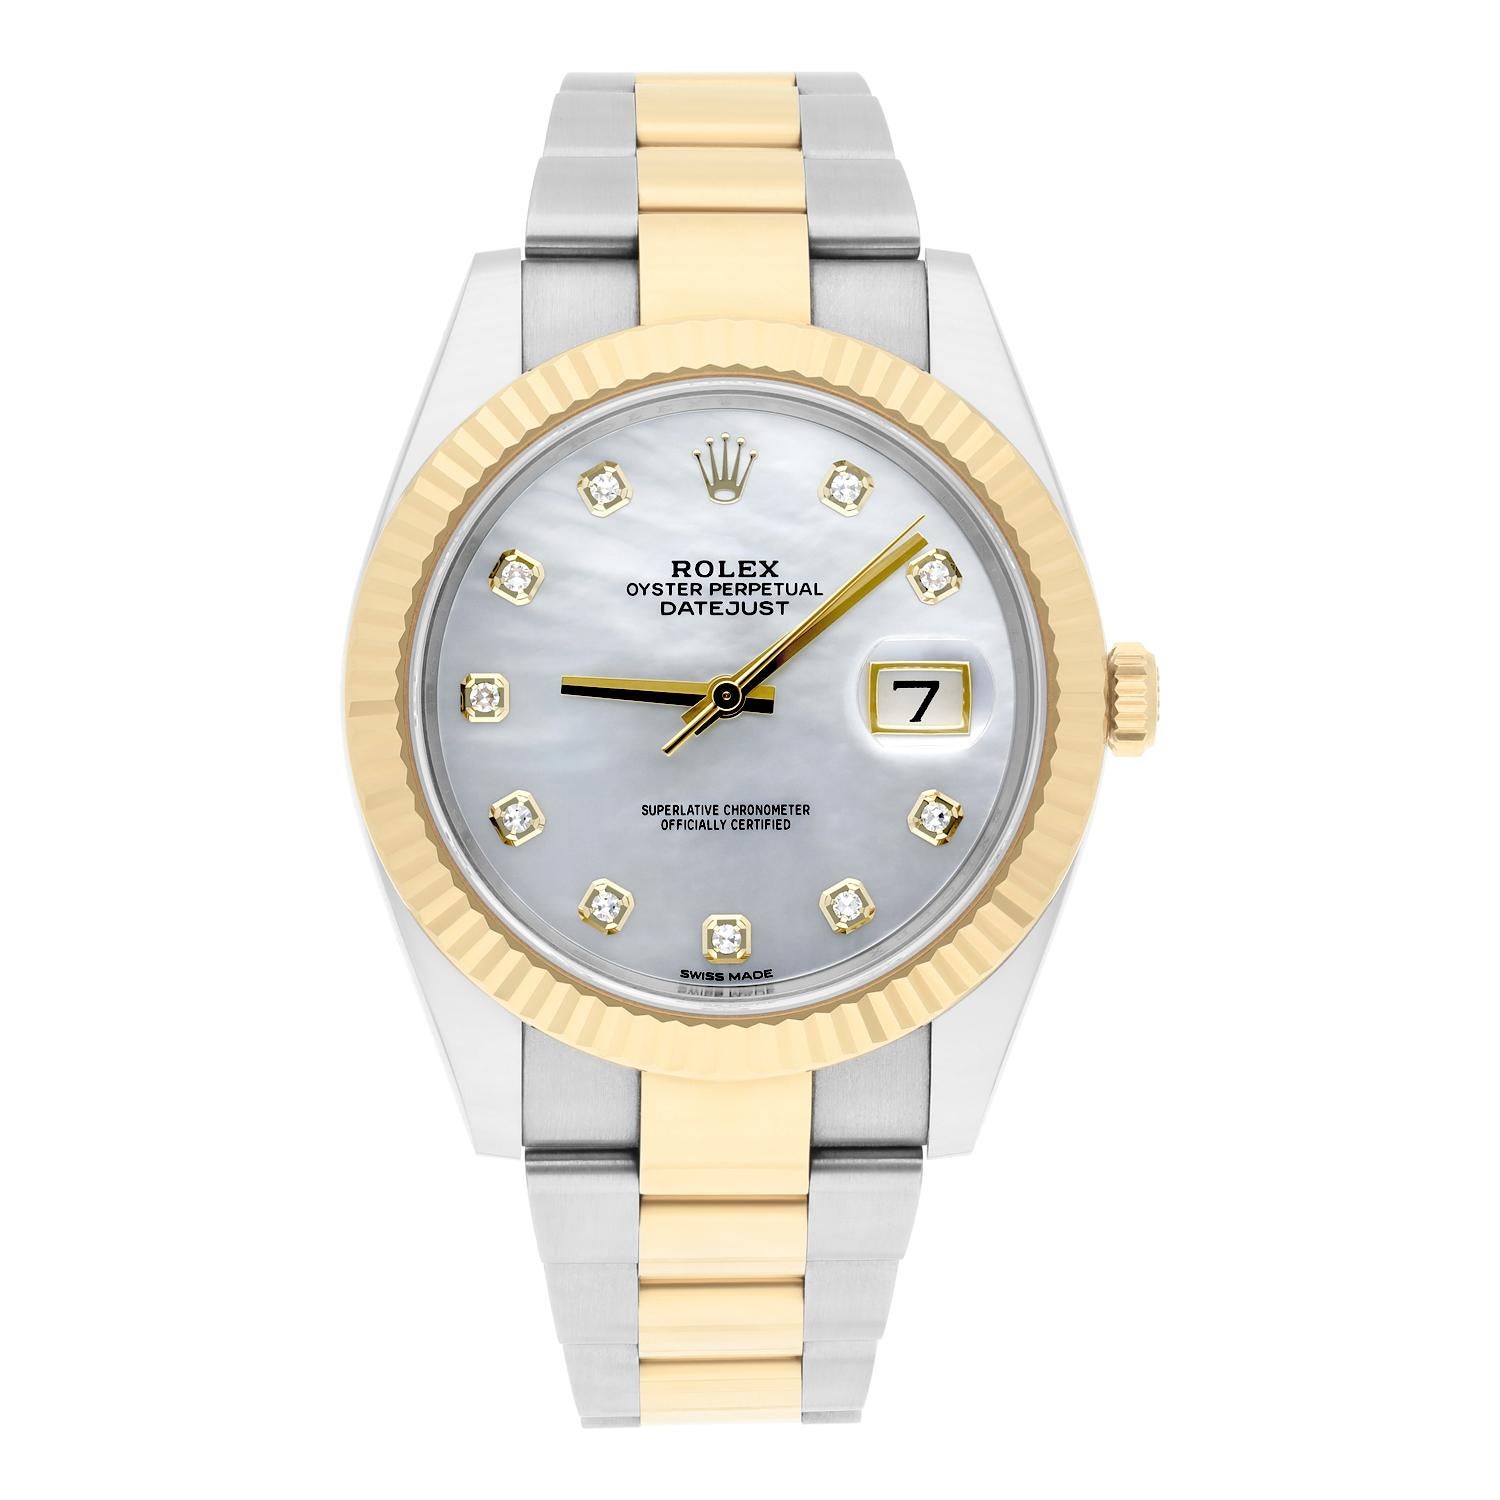 This watch has been professionally polished, serviced and does not have any visible scratches or blemishes. It is a genuine Rolex which has been inspected to verify authenticity. Manufacturer's warranty is valid until July 2025.


Sale comes with